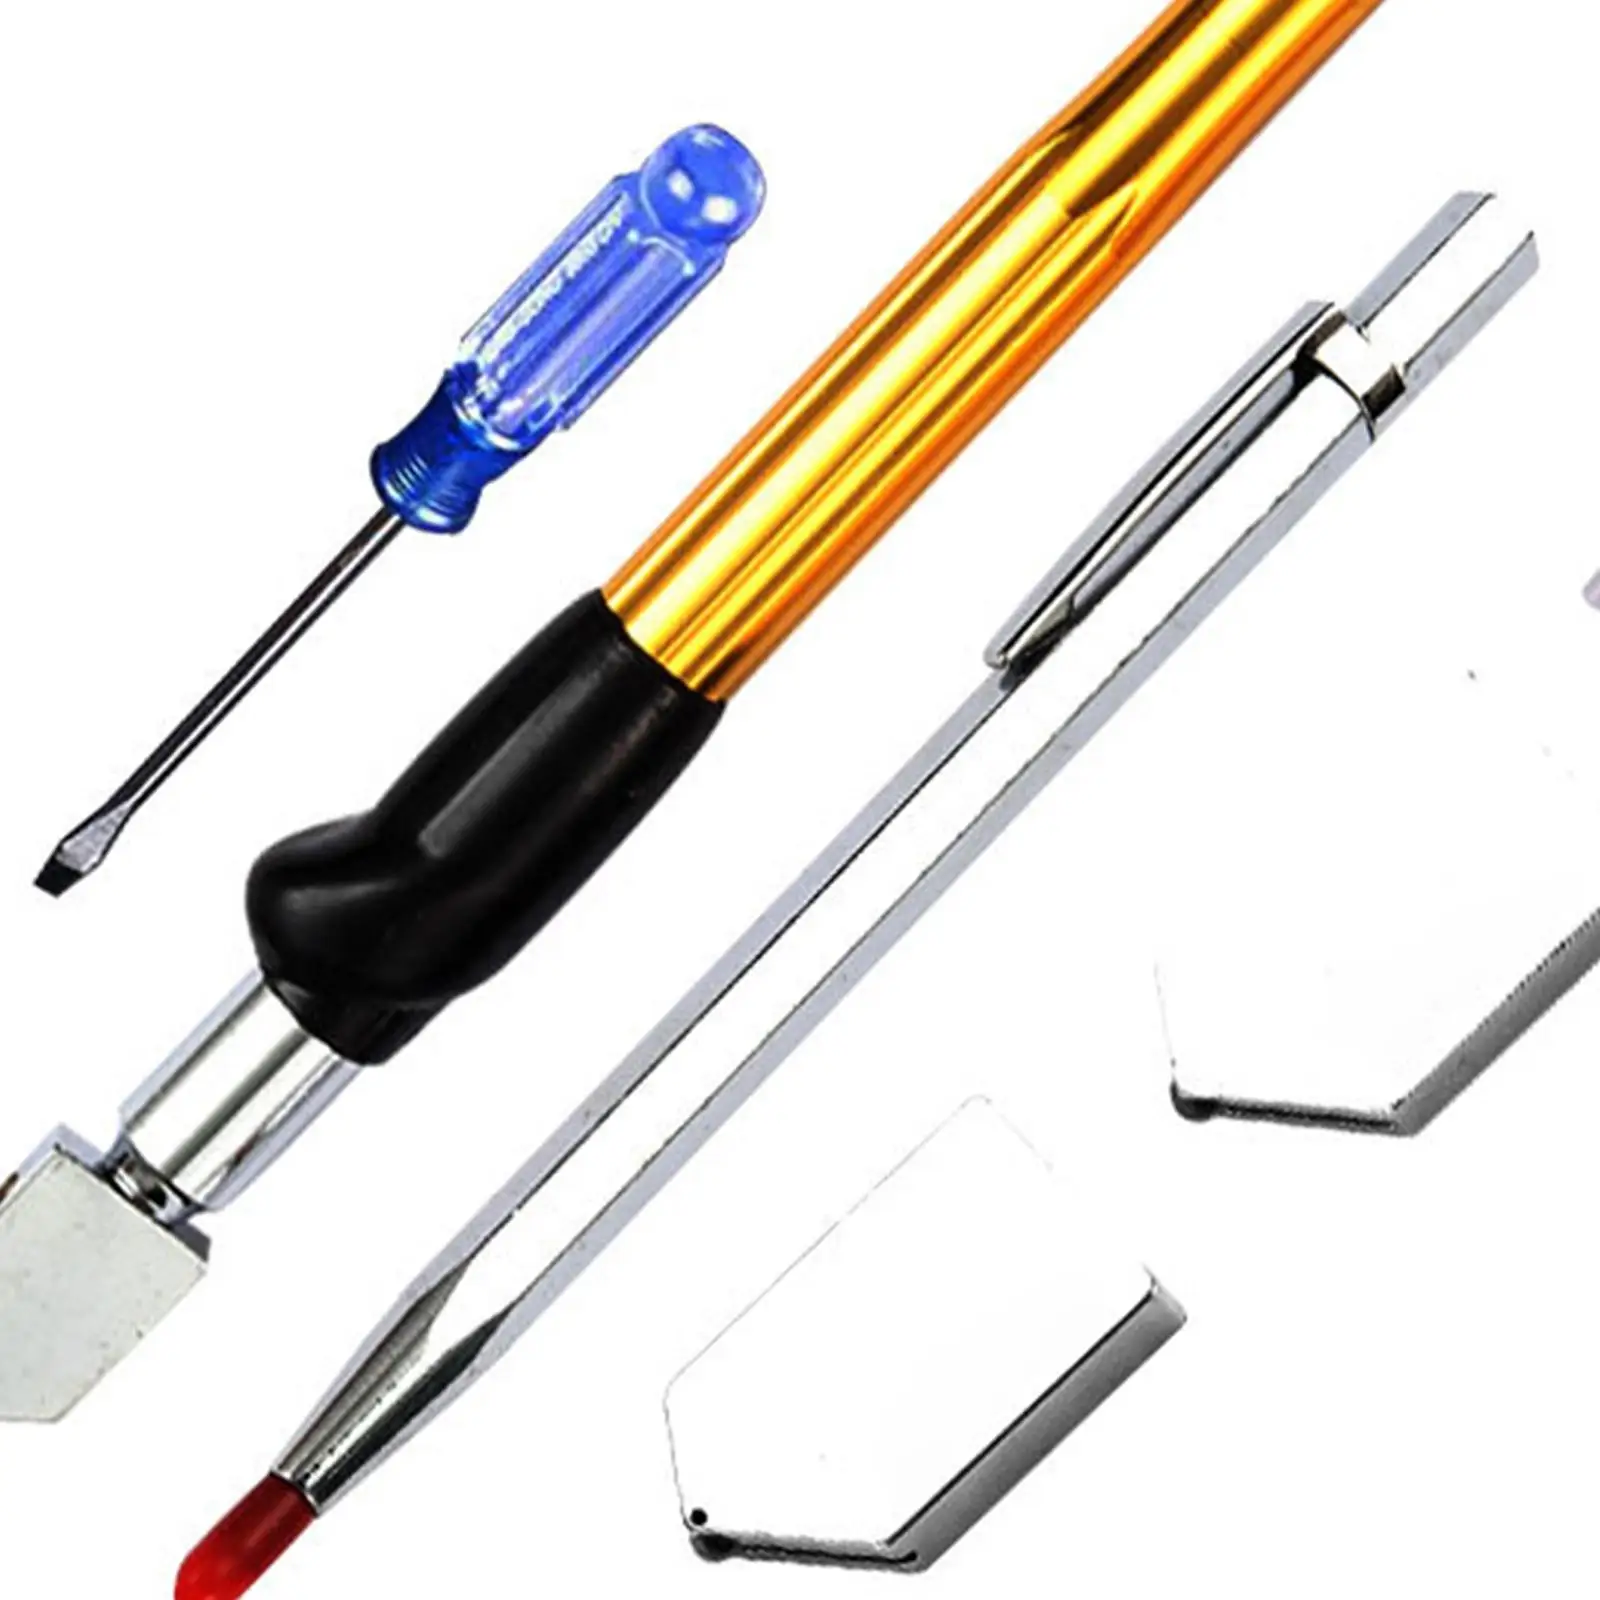 Glass Cutter Ceramic Tiles Hand Tools Professional Mirror Glass Breaker Easy to Glide Glass Cutting Cutting Tool